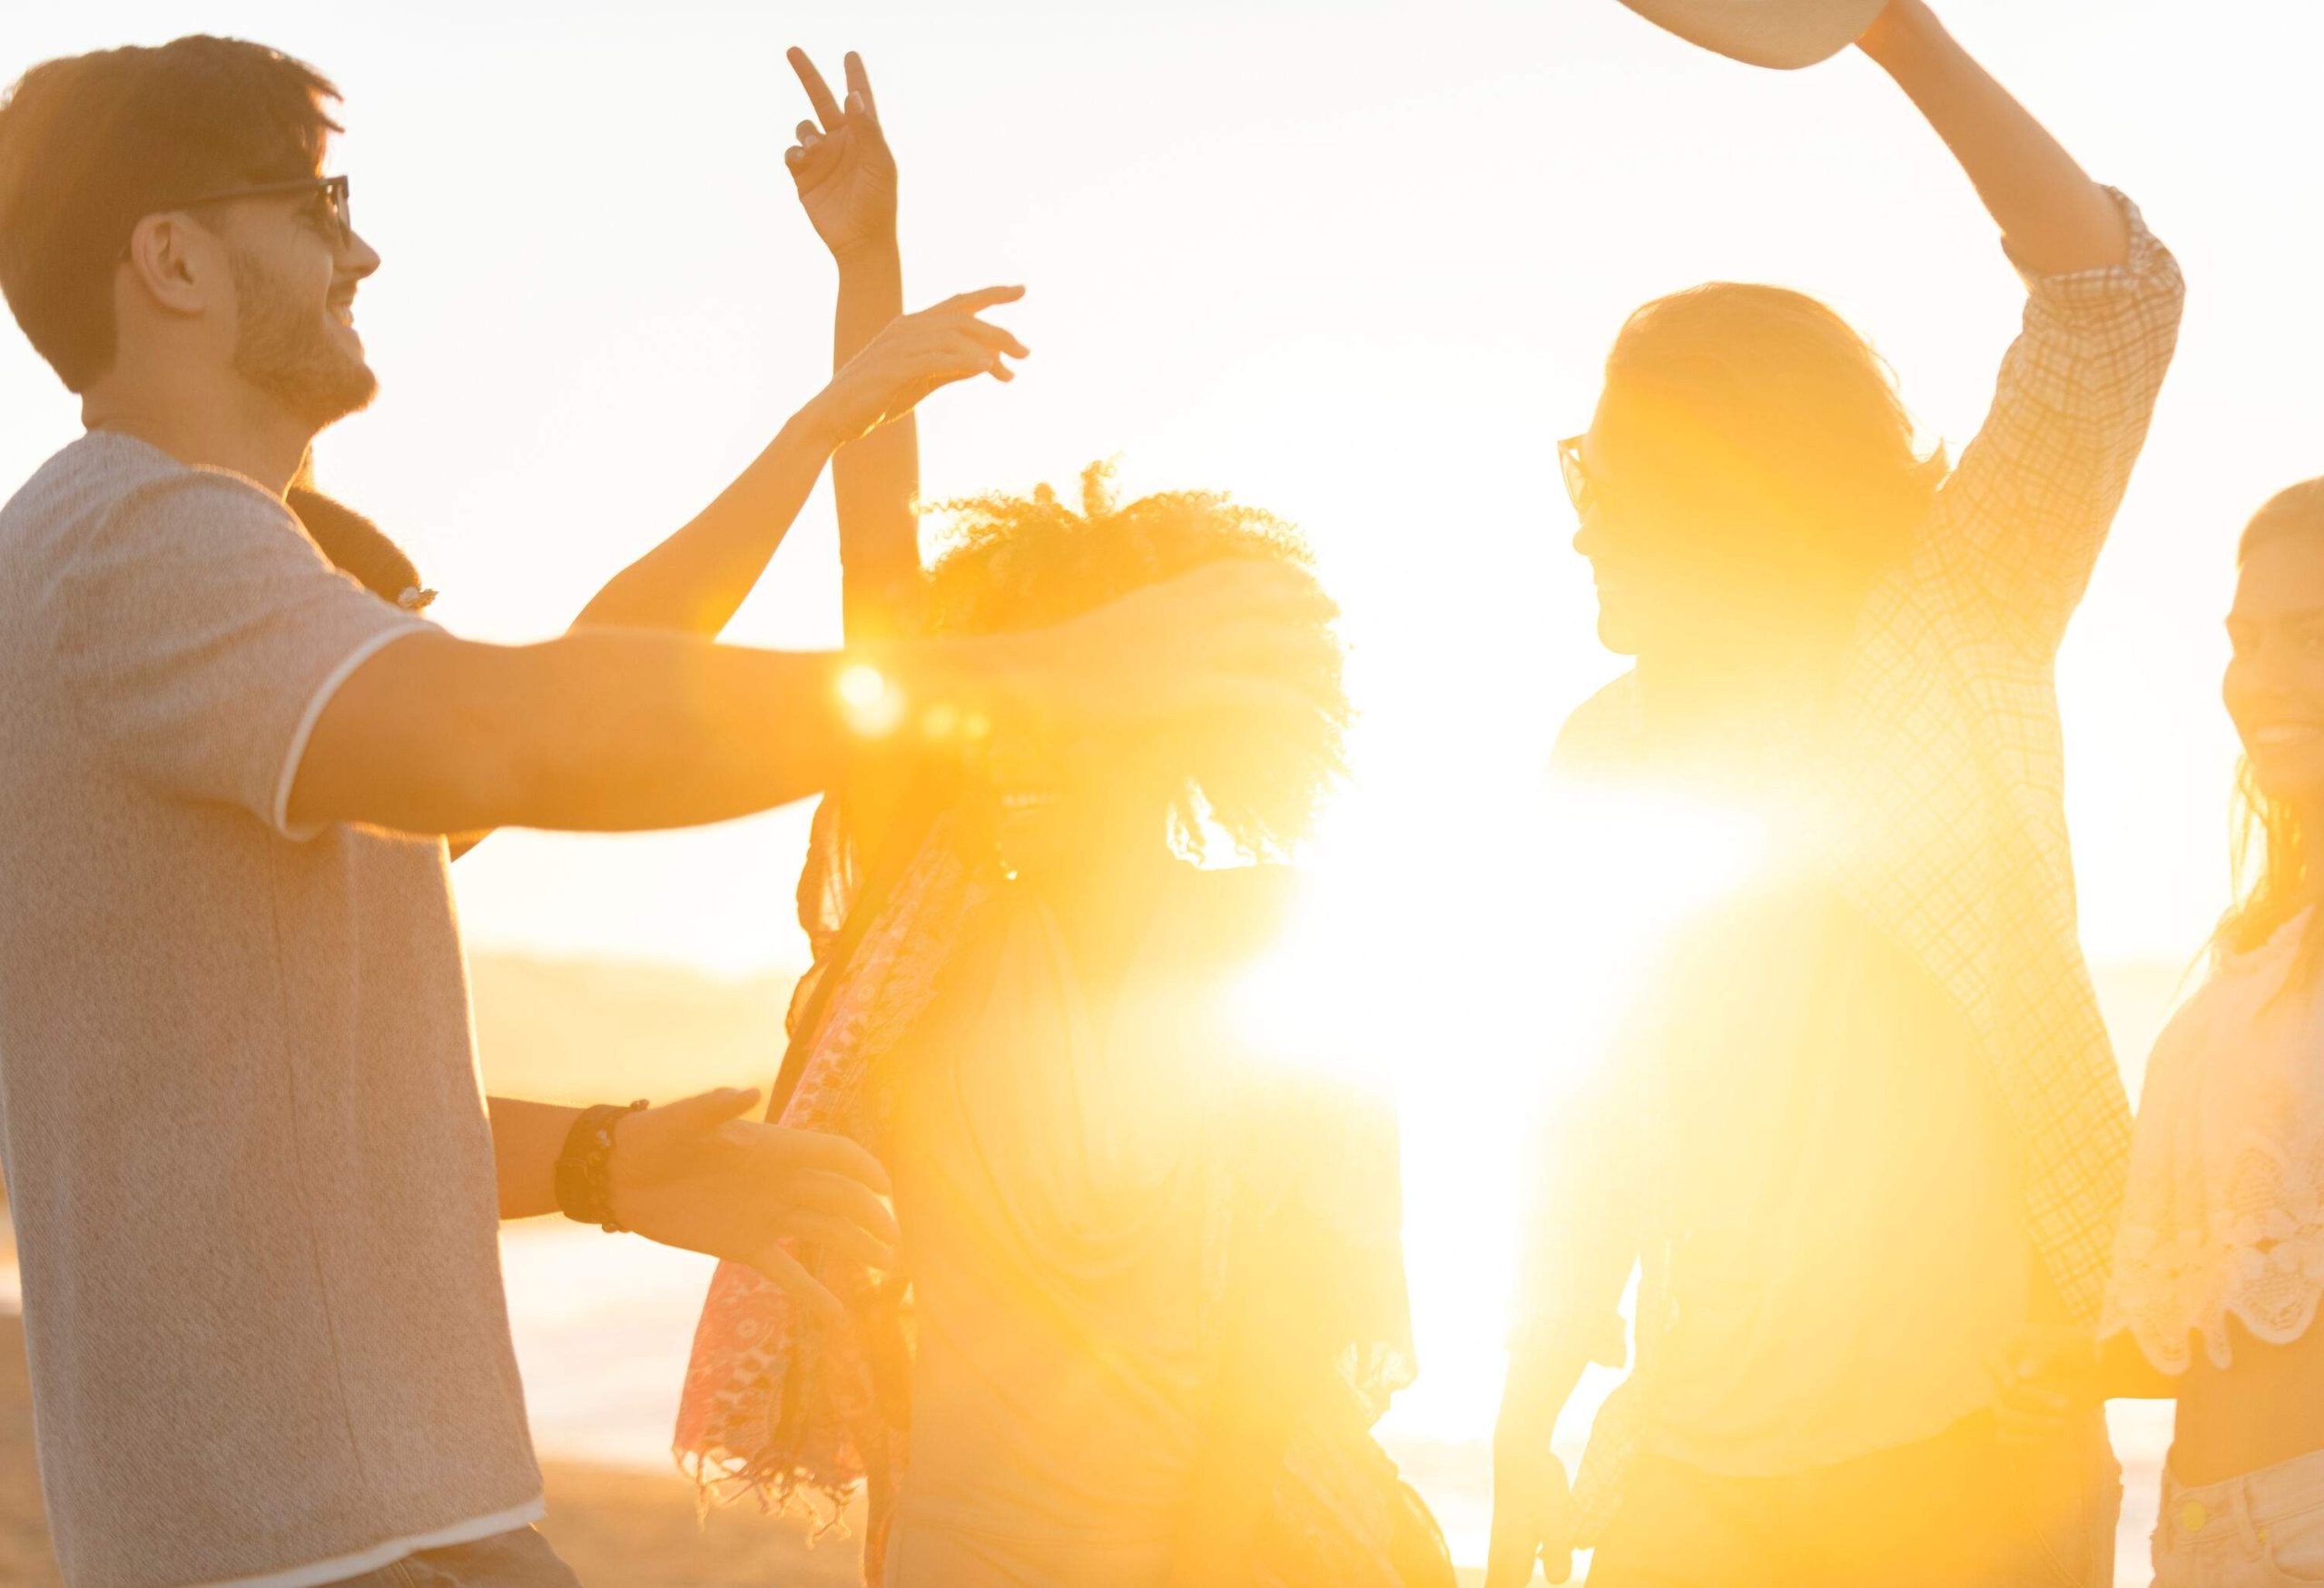 A group of young people dancing and having a good time on the beach at sunset.